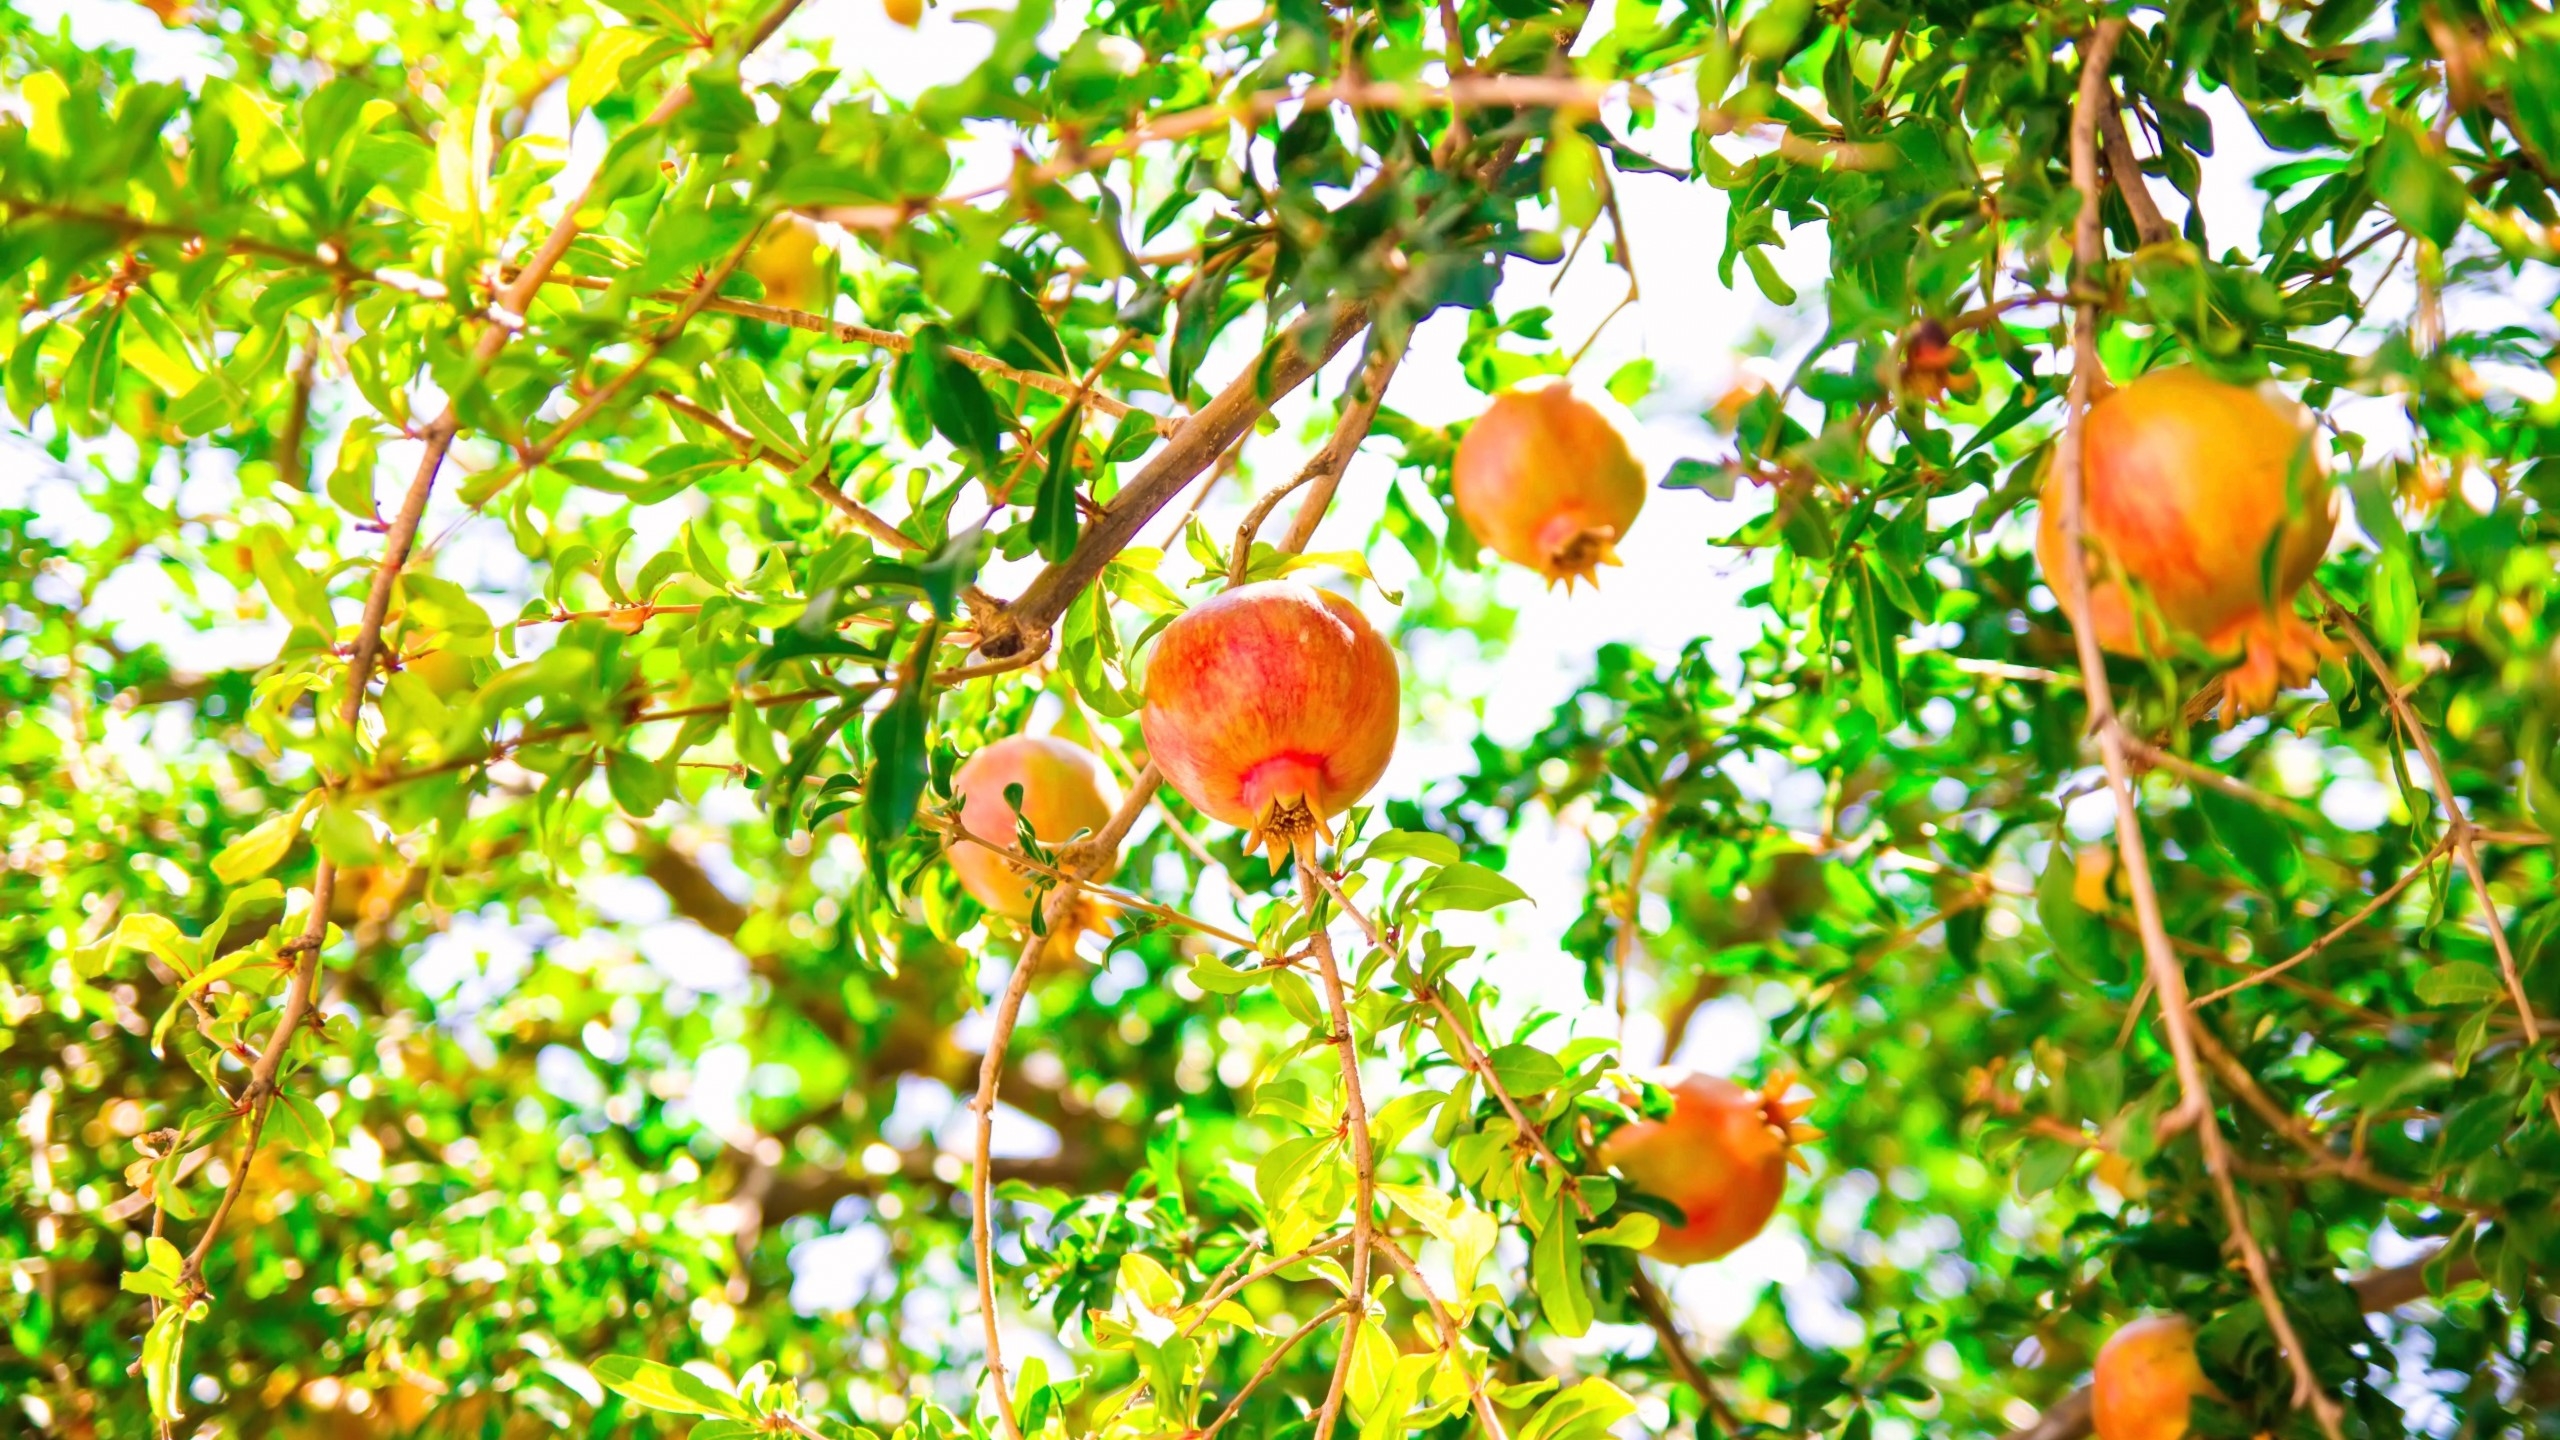 Wallpapers wallpaper pomegranate tree fruits on the desktop